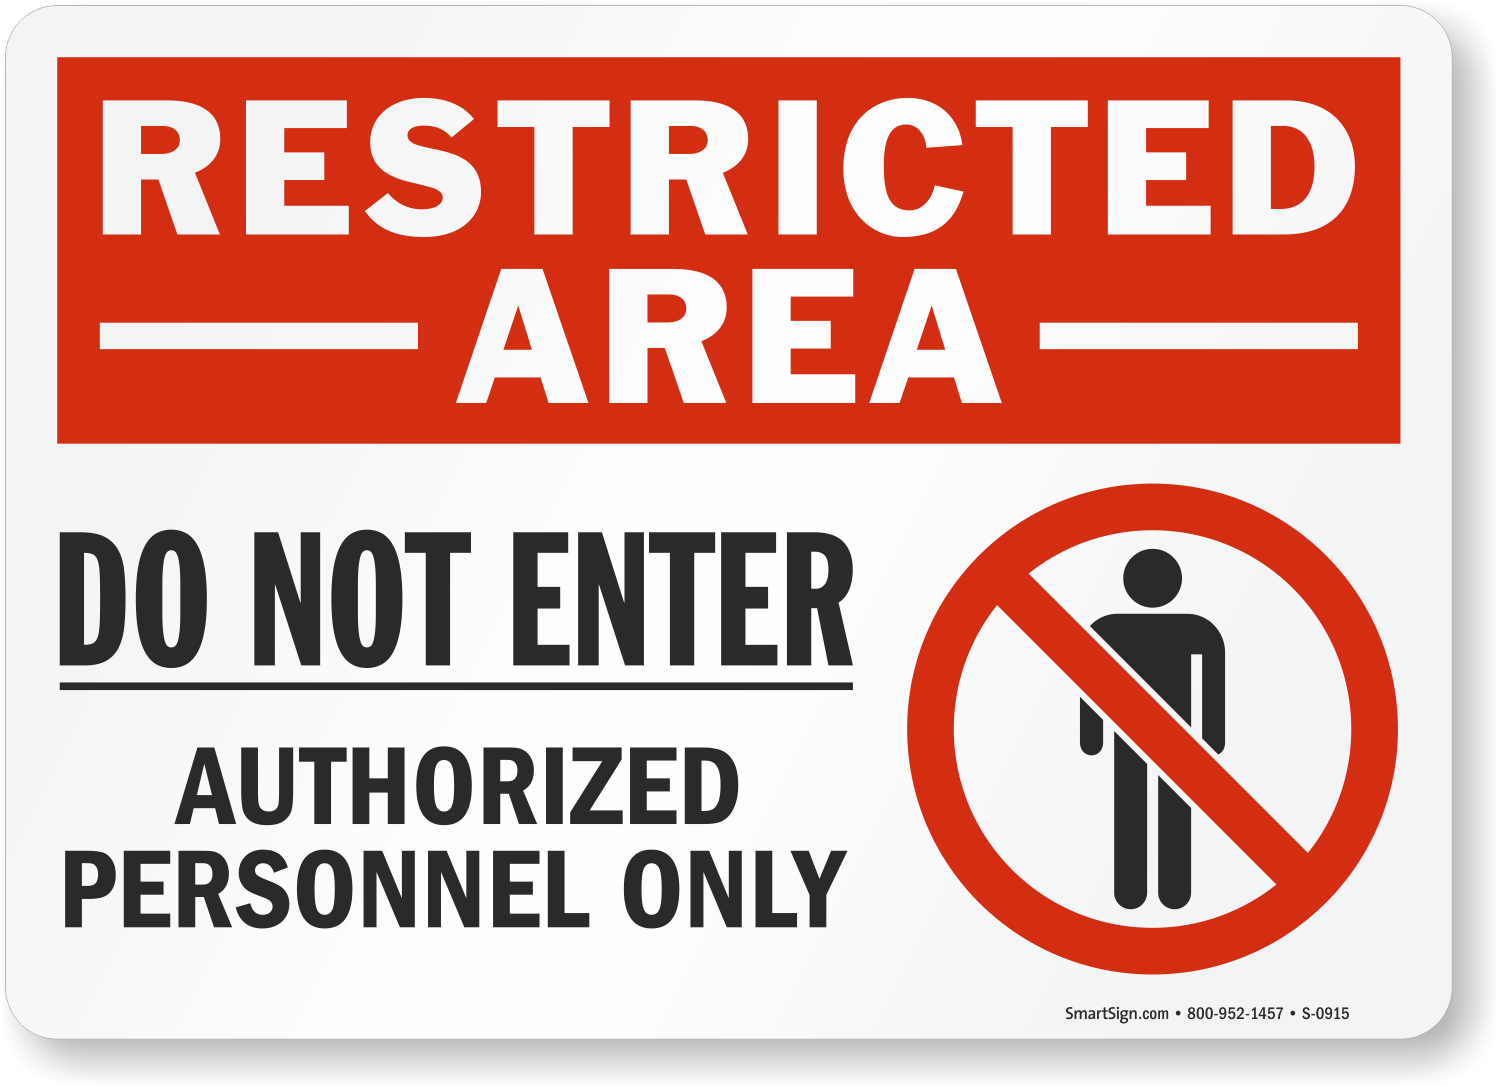 Detail allowed. Restricted area sign. Authorized personnel only. Предупреждение restricted. Do not enter authorized personnel only.